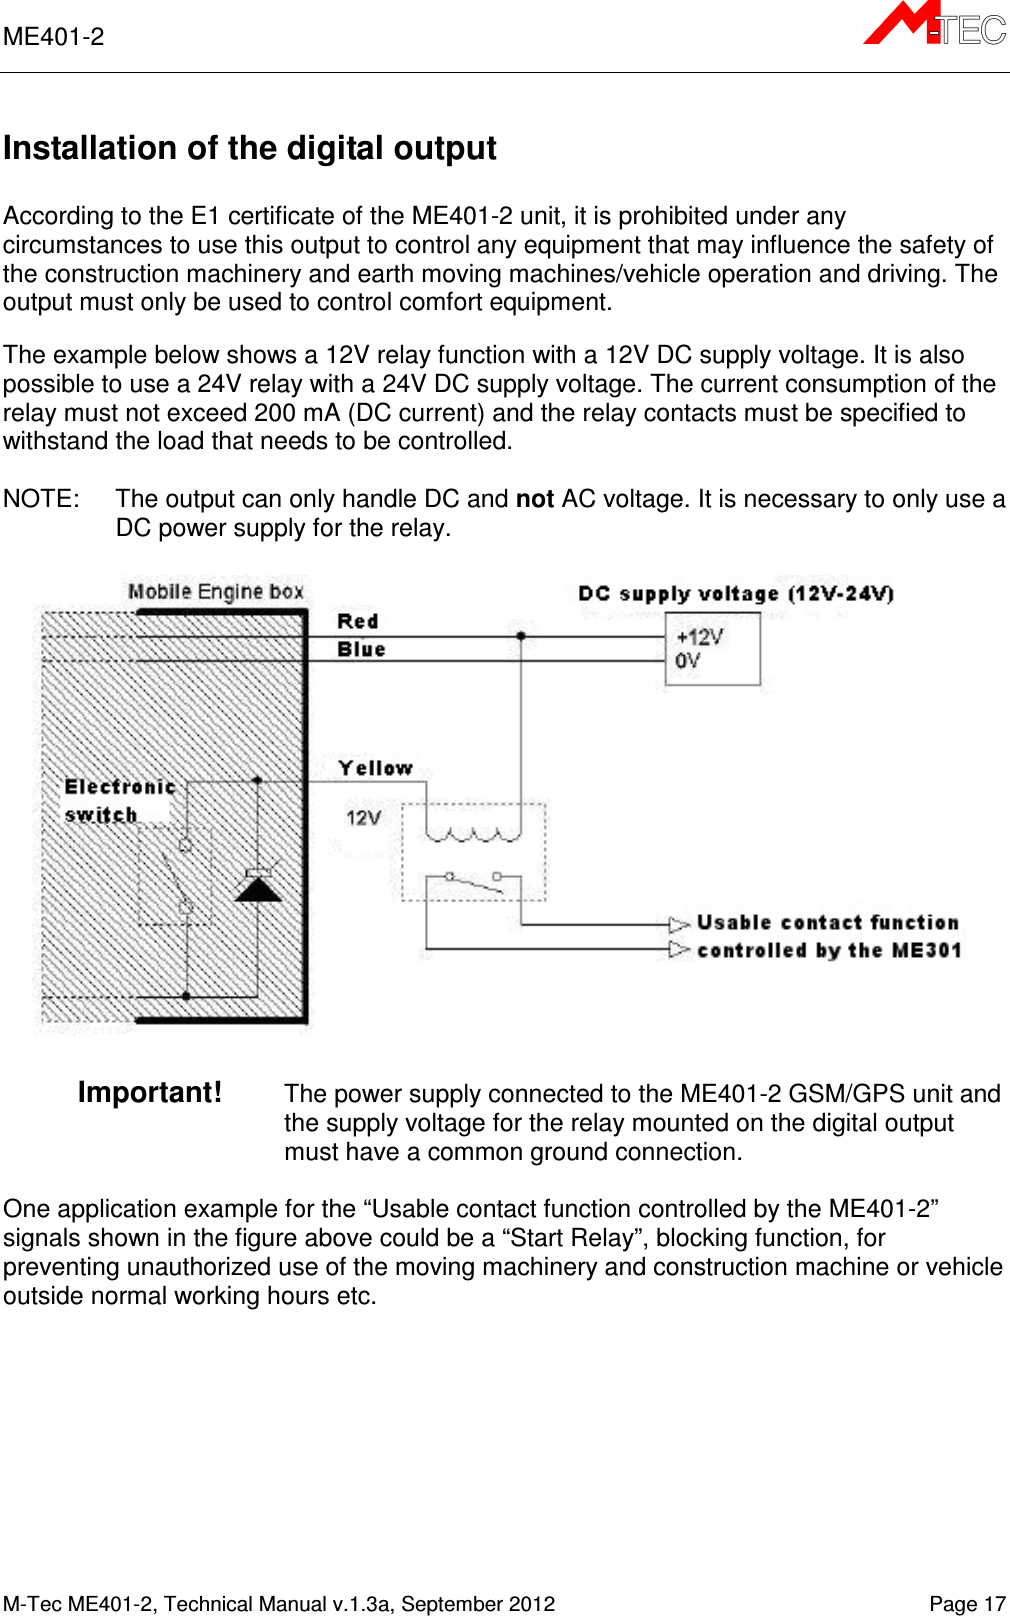 ME401-2       M-Tec ME401-2, Technical Manual v.1.3a, September 2012   Page 17 Installation of the digital output  According to the E1 certificate of the ME401-2 unit, it is prohibited under any circumstances to use this output to control any equipment that may influence the safety of the construction machinery and earth moving machines/vehicle operation and driving. The output must only be used to control comfort equipment.  The example below shows a 12V relay function with a 12V DC supply voltage. It is also possible to use a 24V relay with a 24V DC supply voltage. The current consumption of the relay must not exceed 200 mA (DC current) and the relay contacts must be specified to withstand the load that needs to be controlled.  NOTE:  The output can only handle DC and not AC voltage. It is necessary to only use a DC power supply for the relay.    Important!   The power supply connected to the ME401-2 GSM/GPS unit and the supply voltage for the relay mounted on the digital output must have a common ground connection.   One application example for the “Usable contact function controlled by the ME401-2” signals shown in the figure above could be a “Start Relay”, blocking function, for preventing unauthorized use of the moving machinery and construction machine or vehicle outside normal working hours etc.  